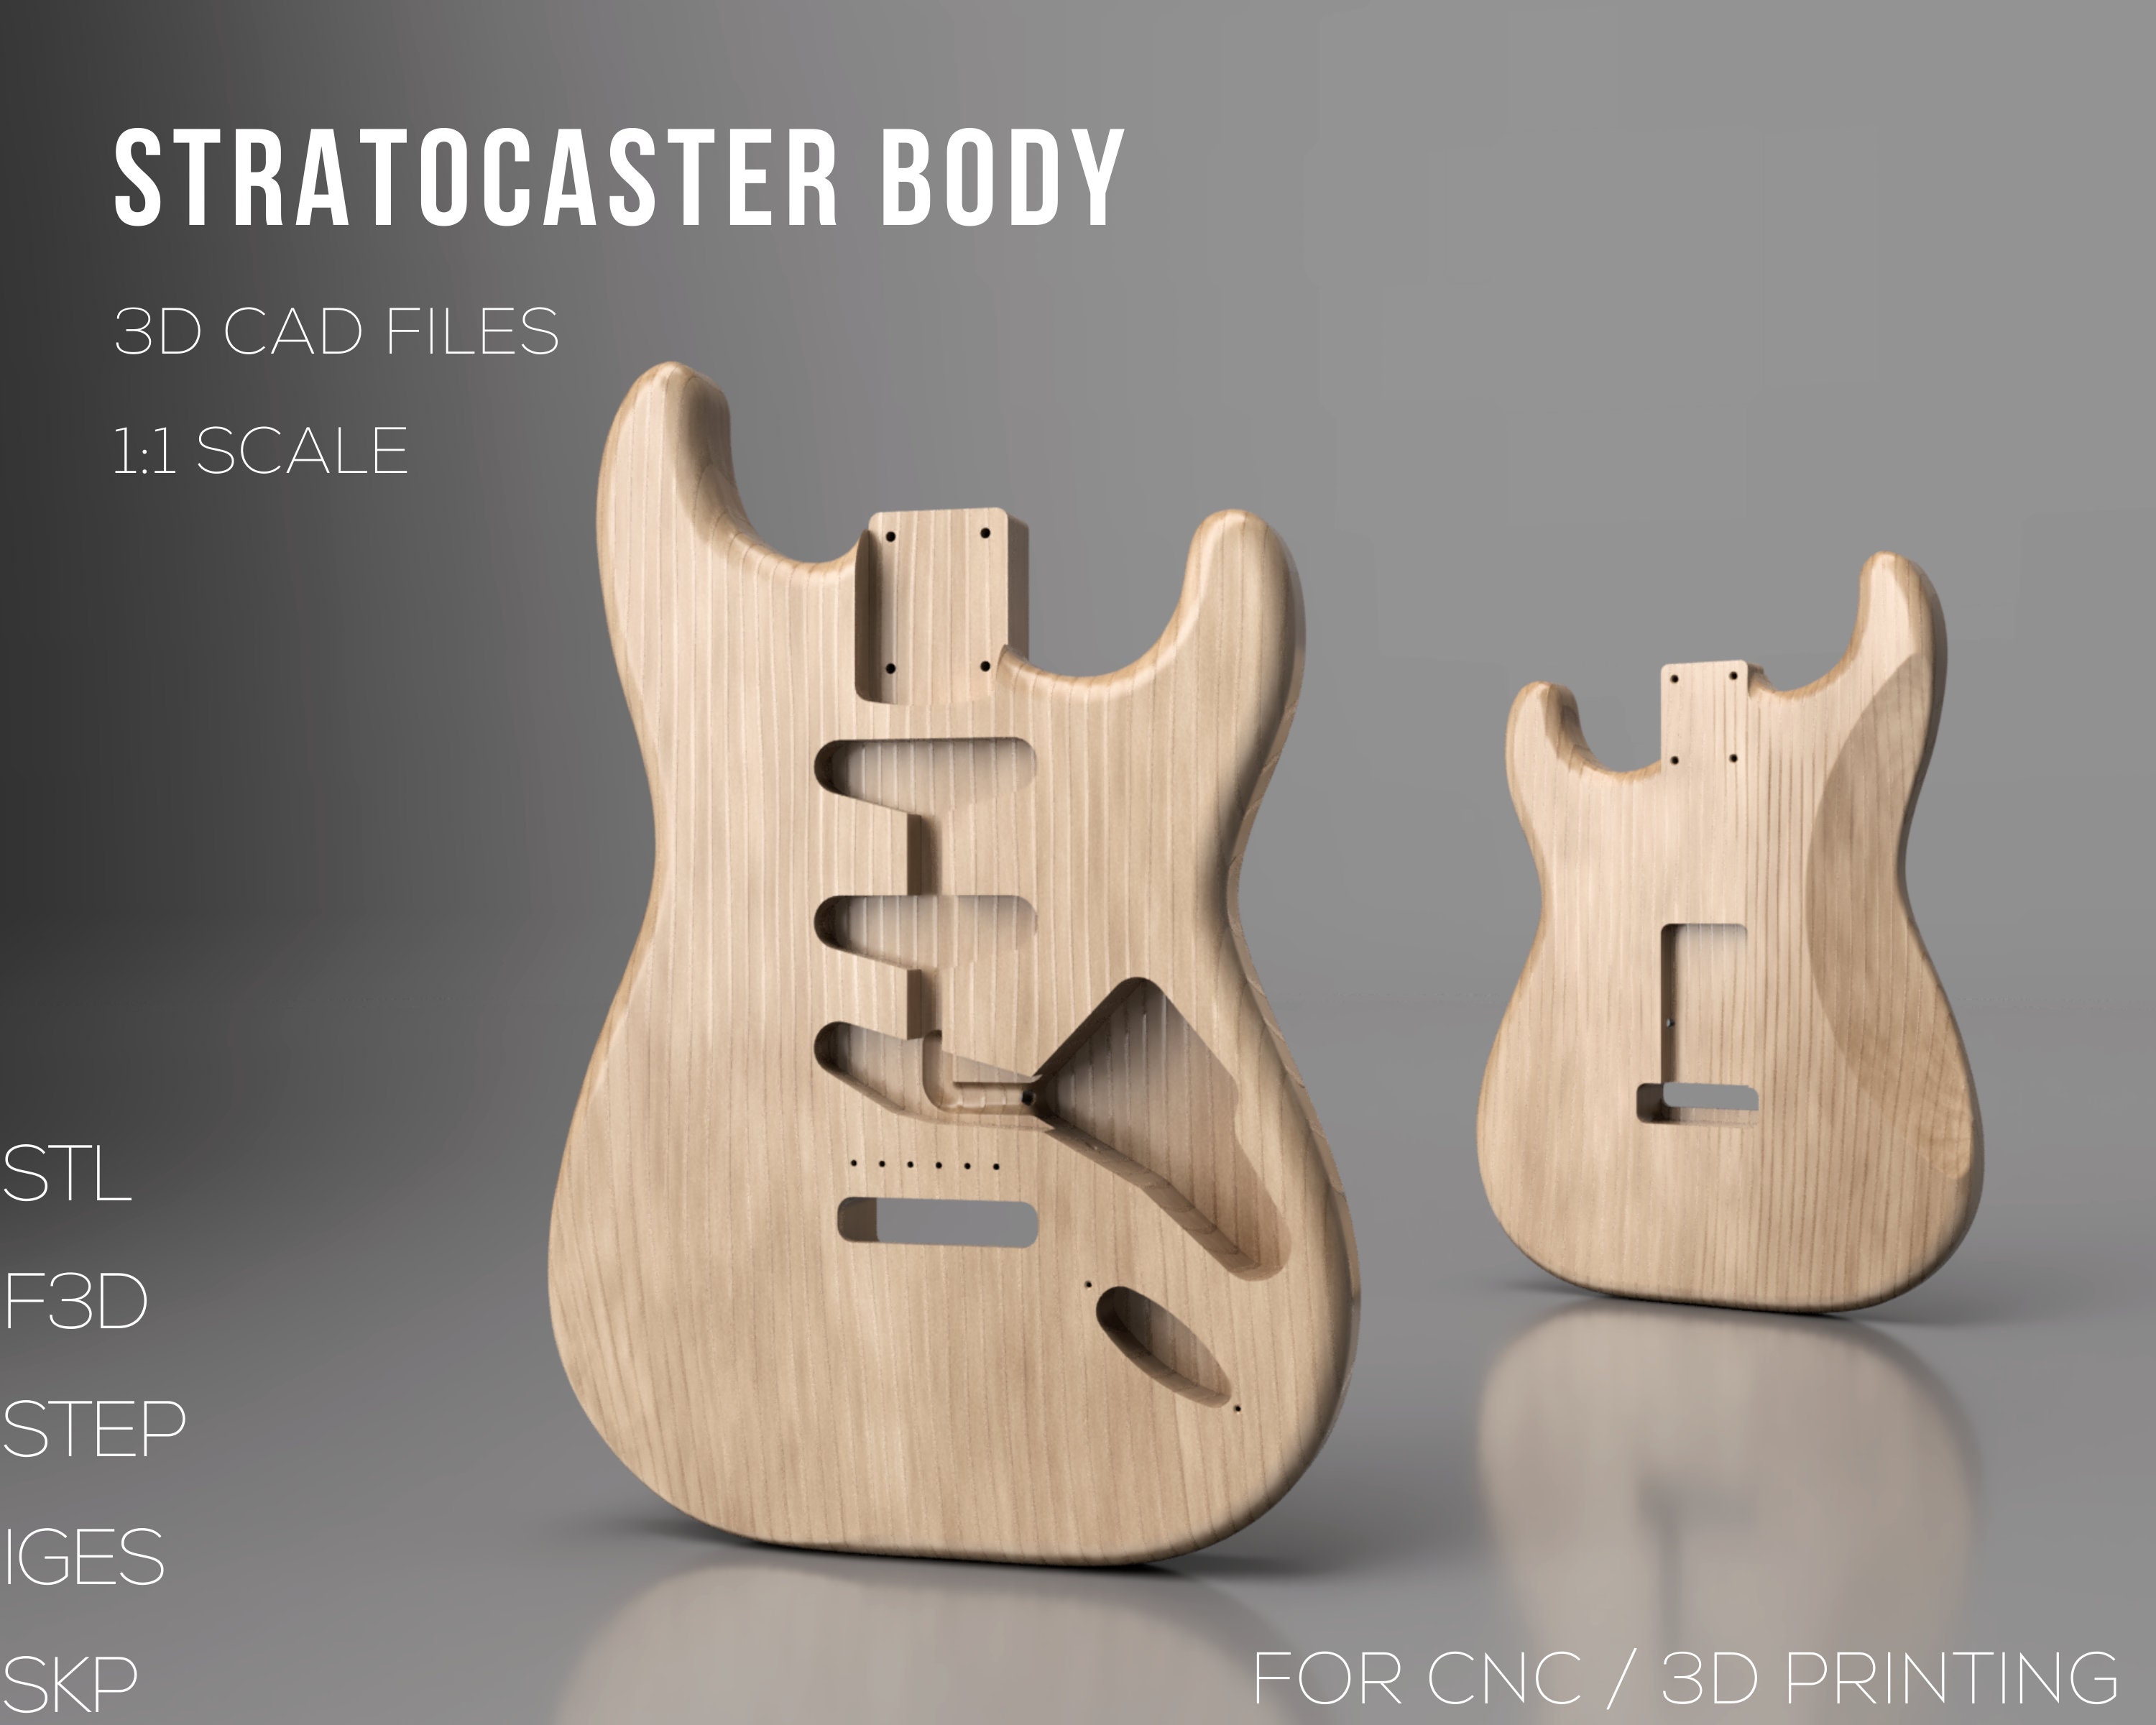 Fender Stratocaster Body 3D CAD Files Stl Step Skp F3d 3mf 1:1 Scale CNC  Cut Files 3D Printing Guitar Build Woodworking Plan 